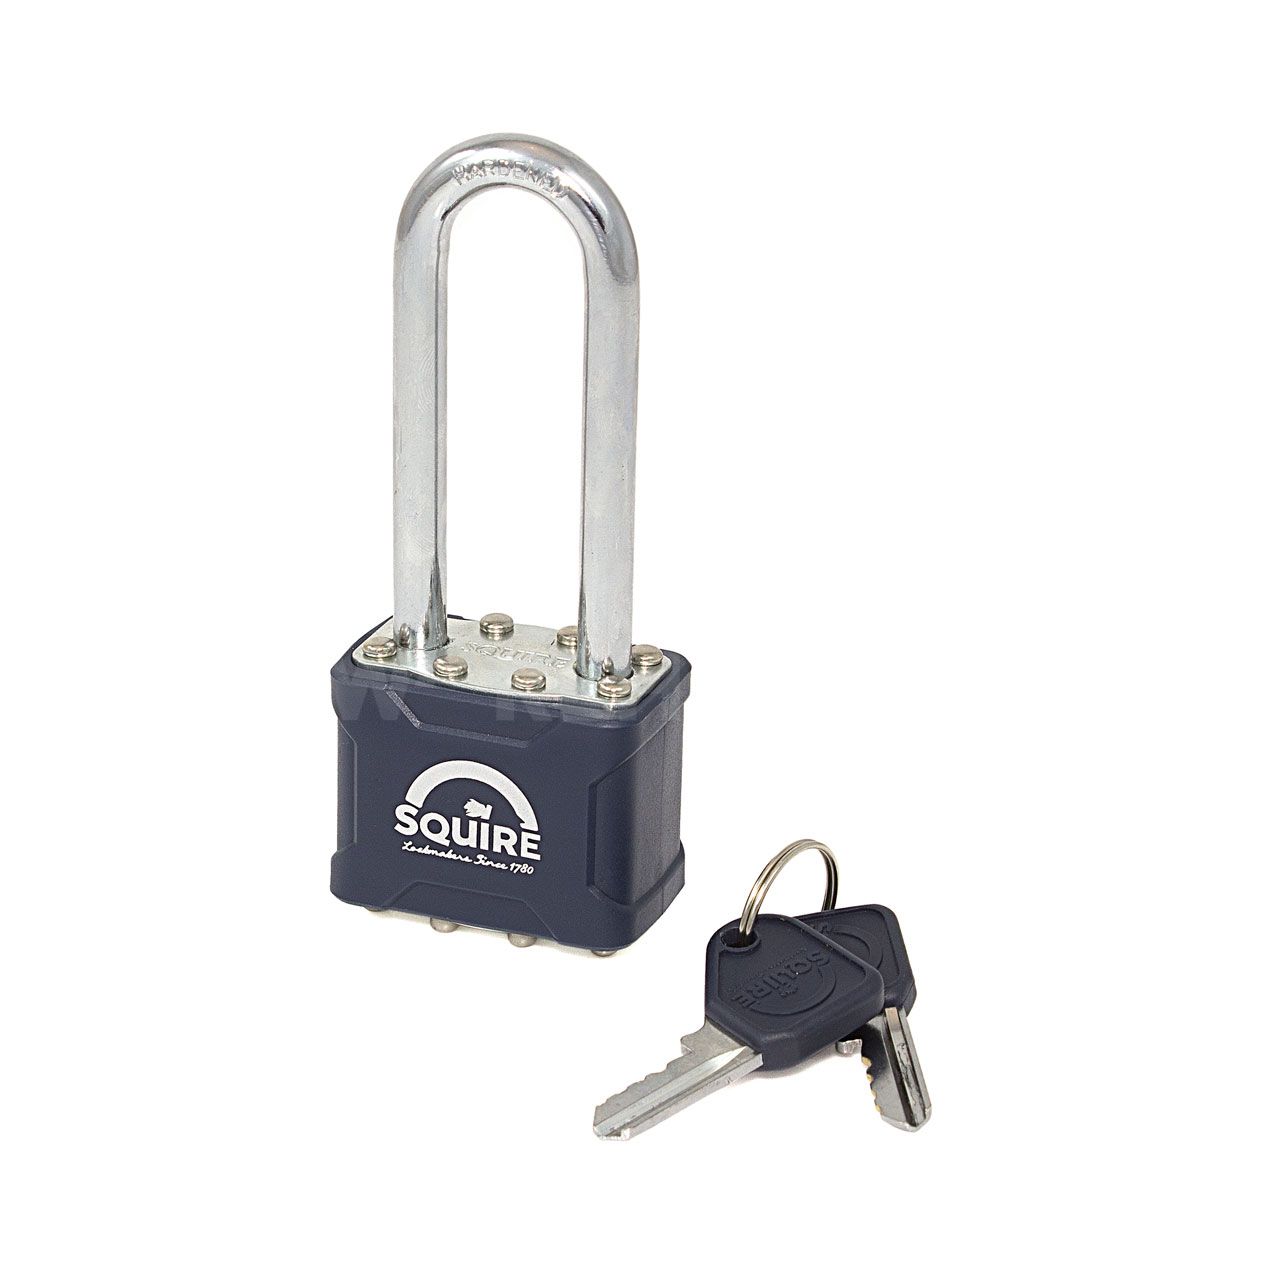 Dimensions Image: Squire Stronglock 35 - 2.5" Long Shackle Padlock